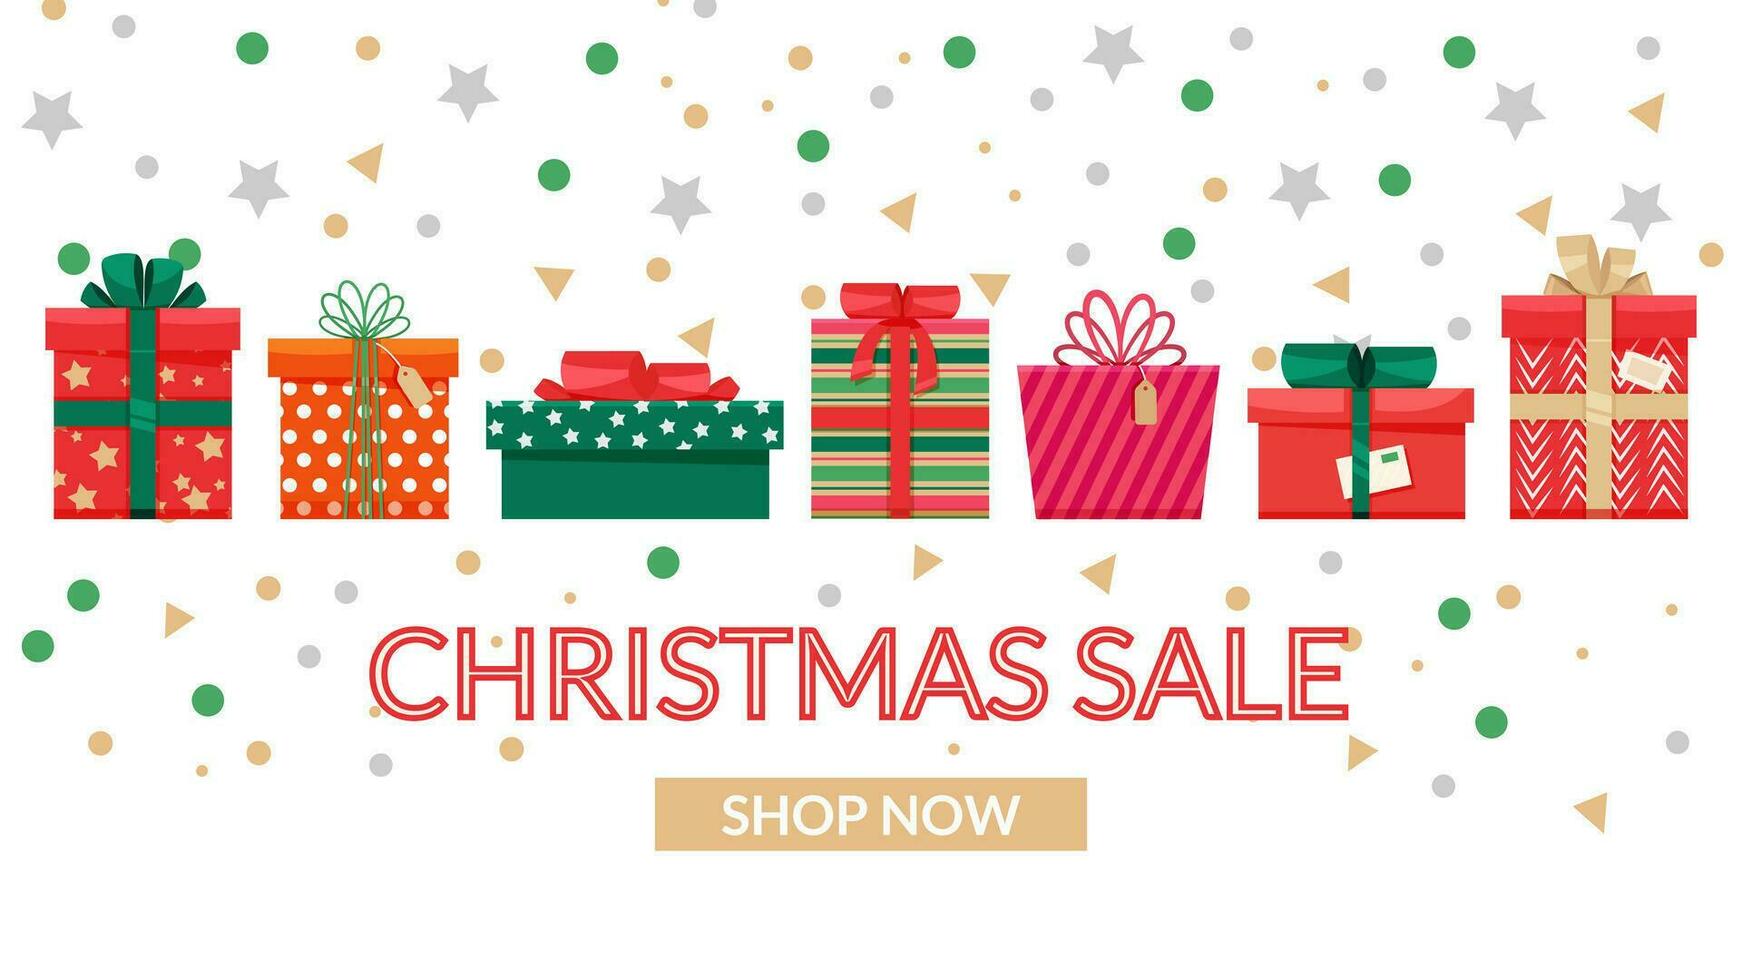 Christmas sale banner template with festive decoration. Gift boxes, present with ribbons. Vector illustration